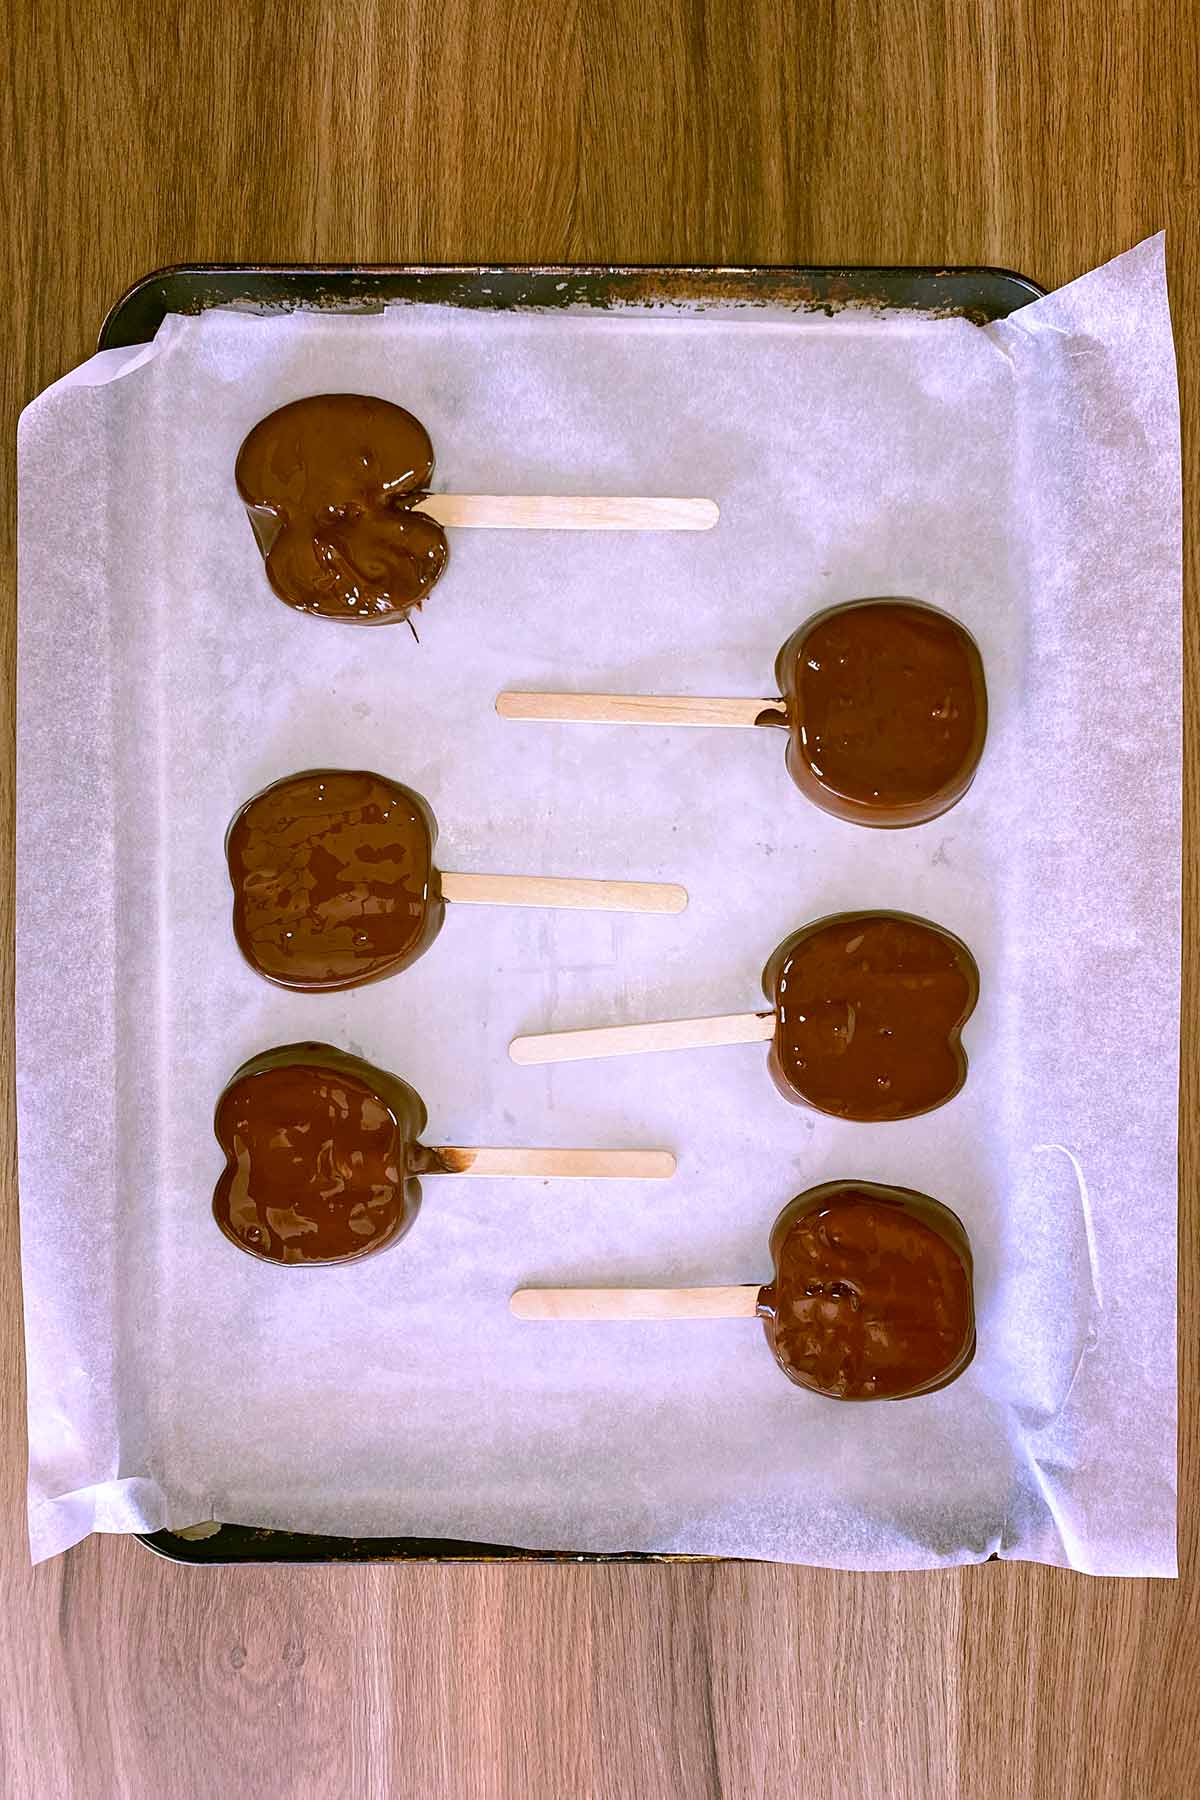 Slices of apple, coated in chocolate with lollipop sticks in them.